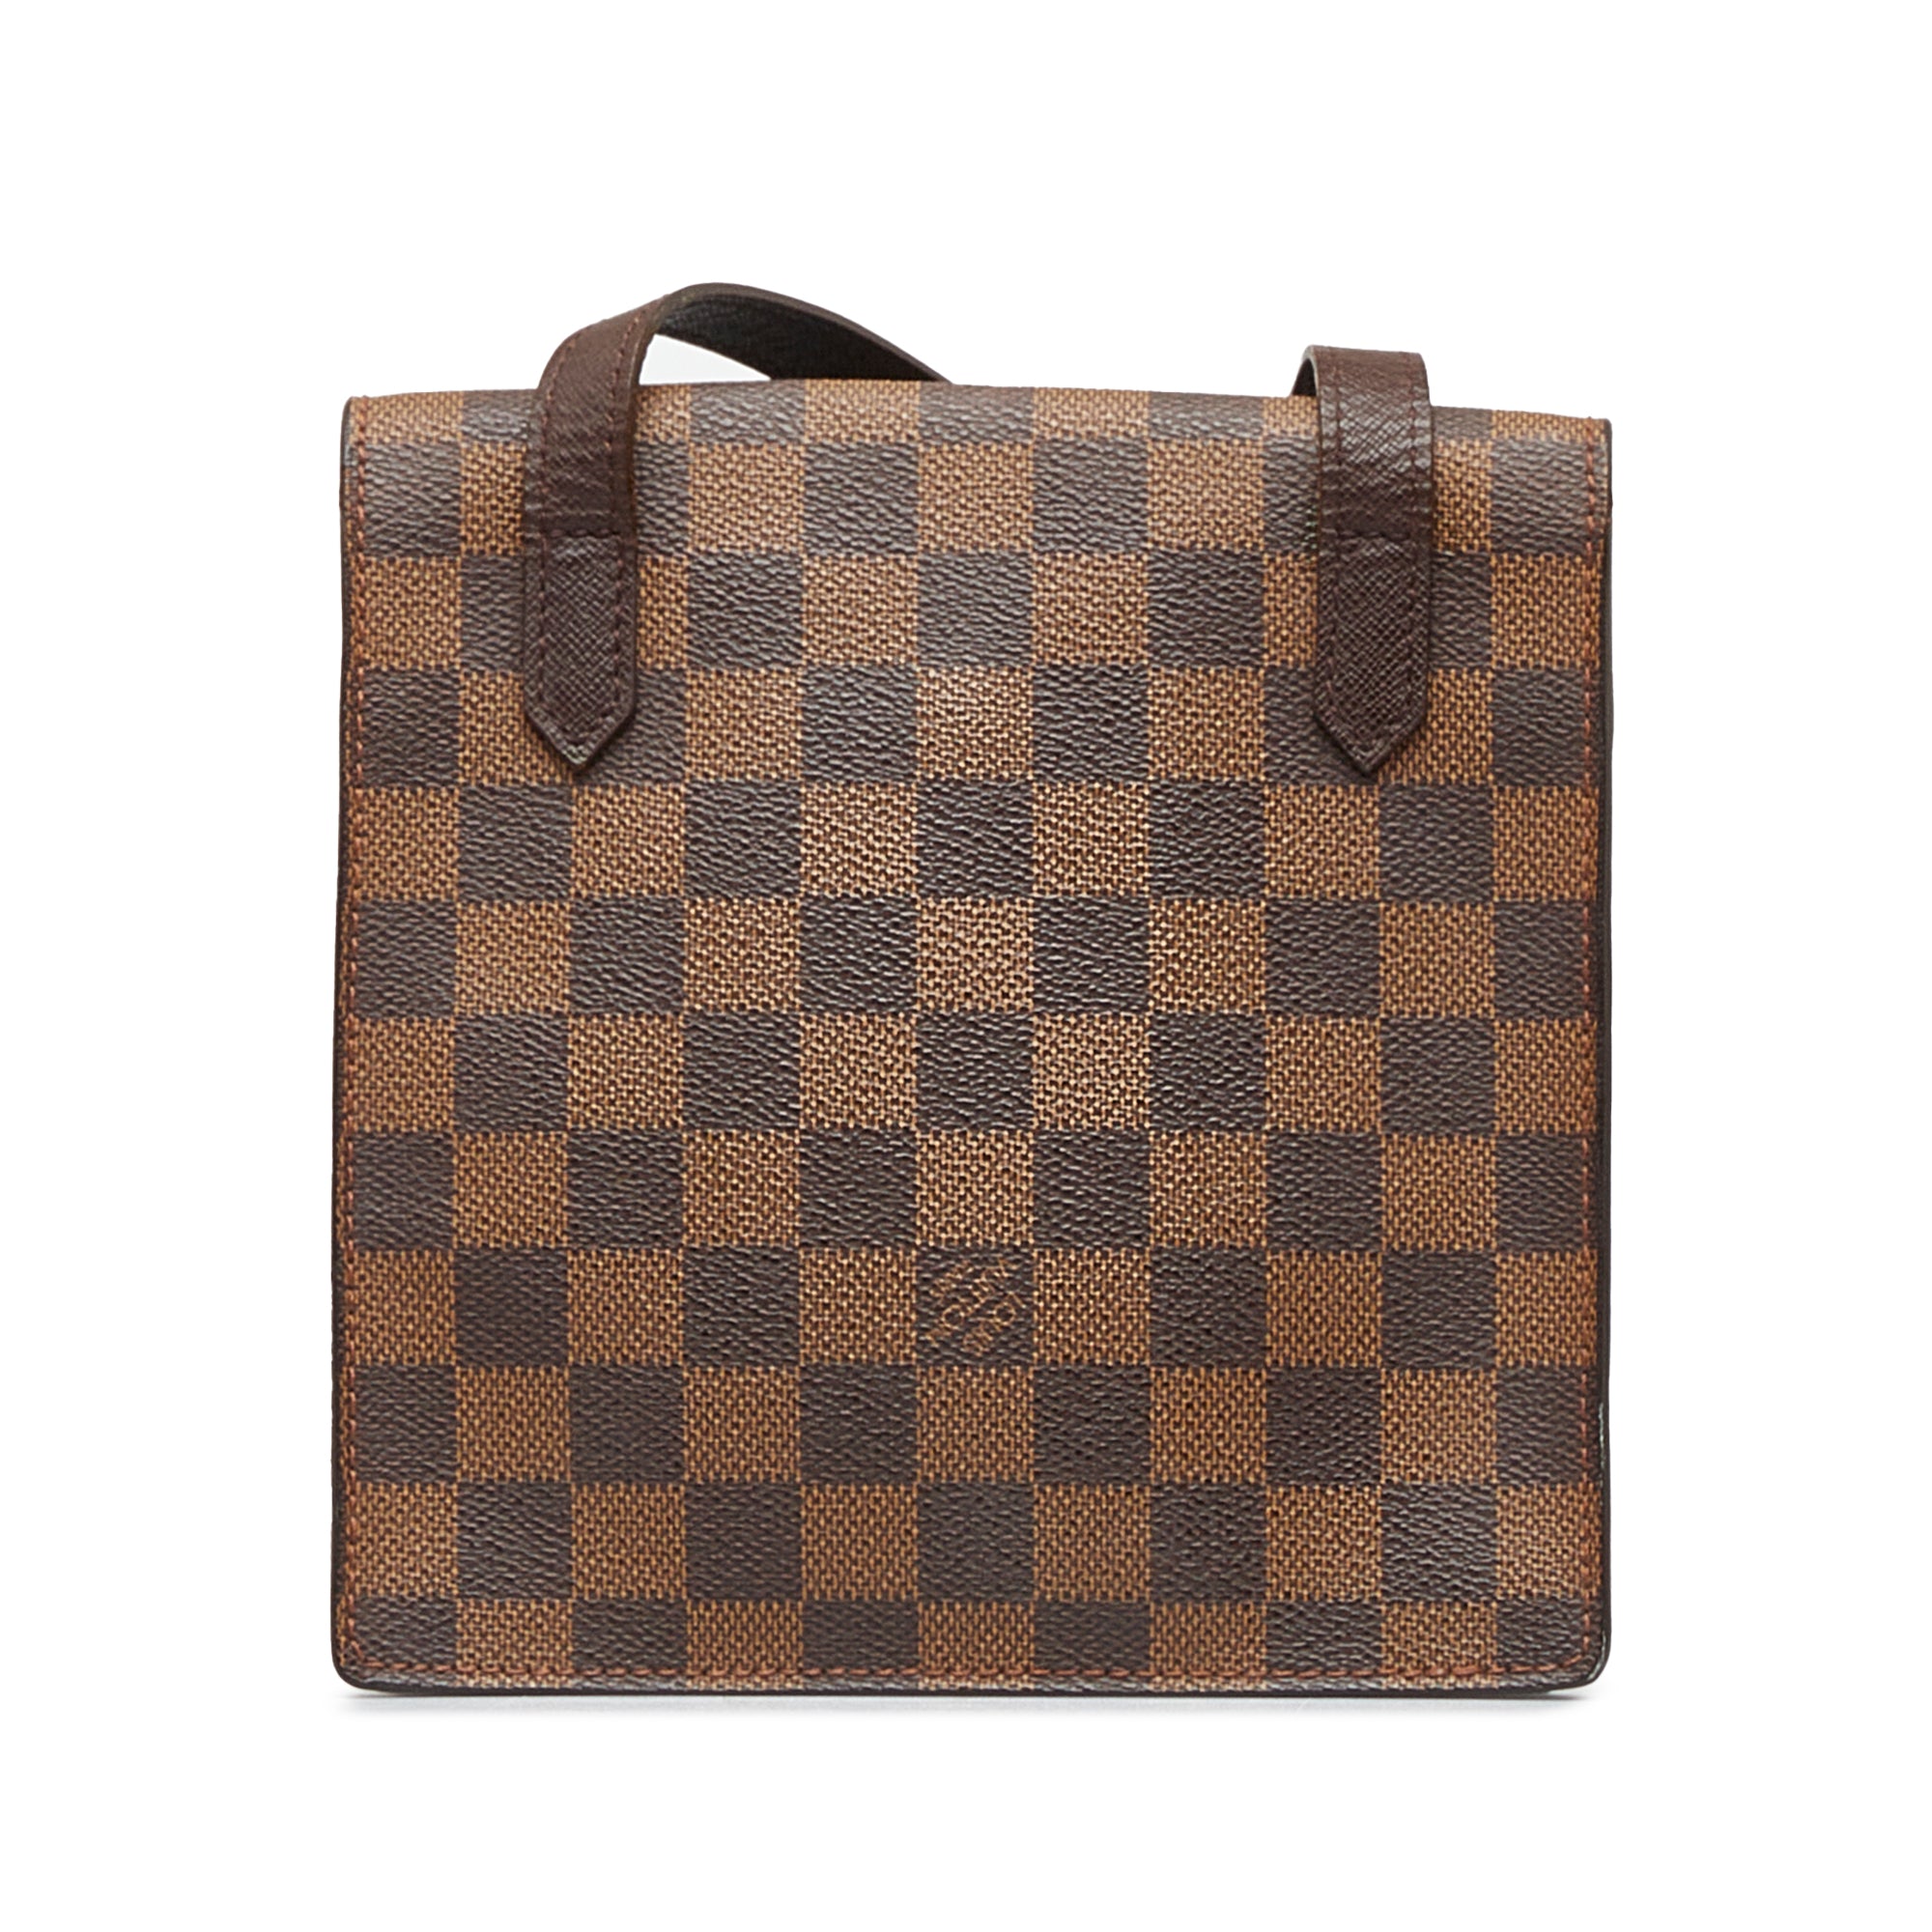 Louis Vuitton Damier Marais Bucket Shoulder Tote Bag Great Condition -  clothing & accessories - by owner - apparel